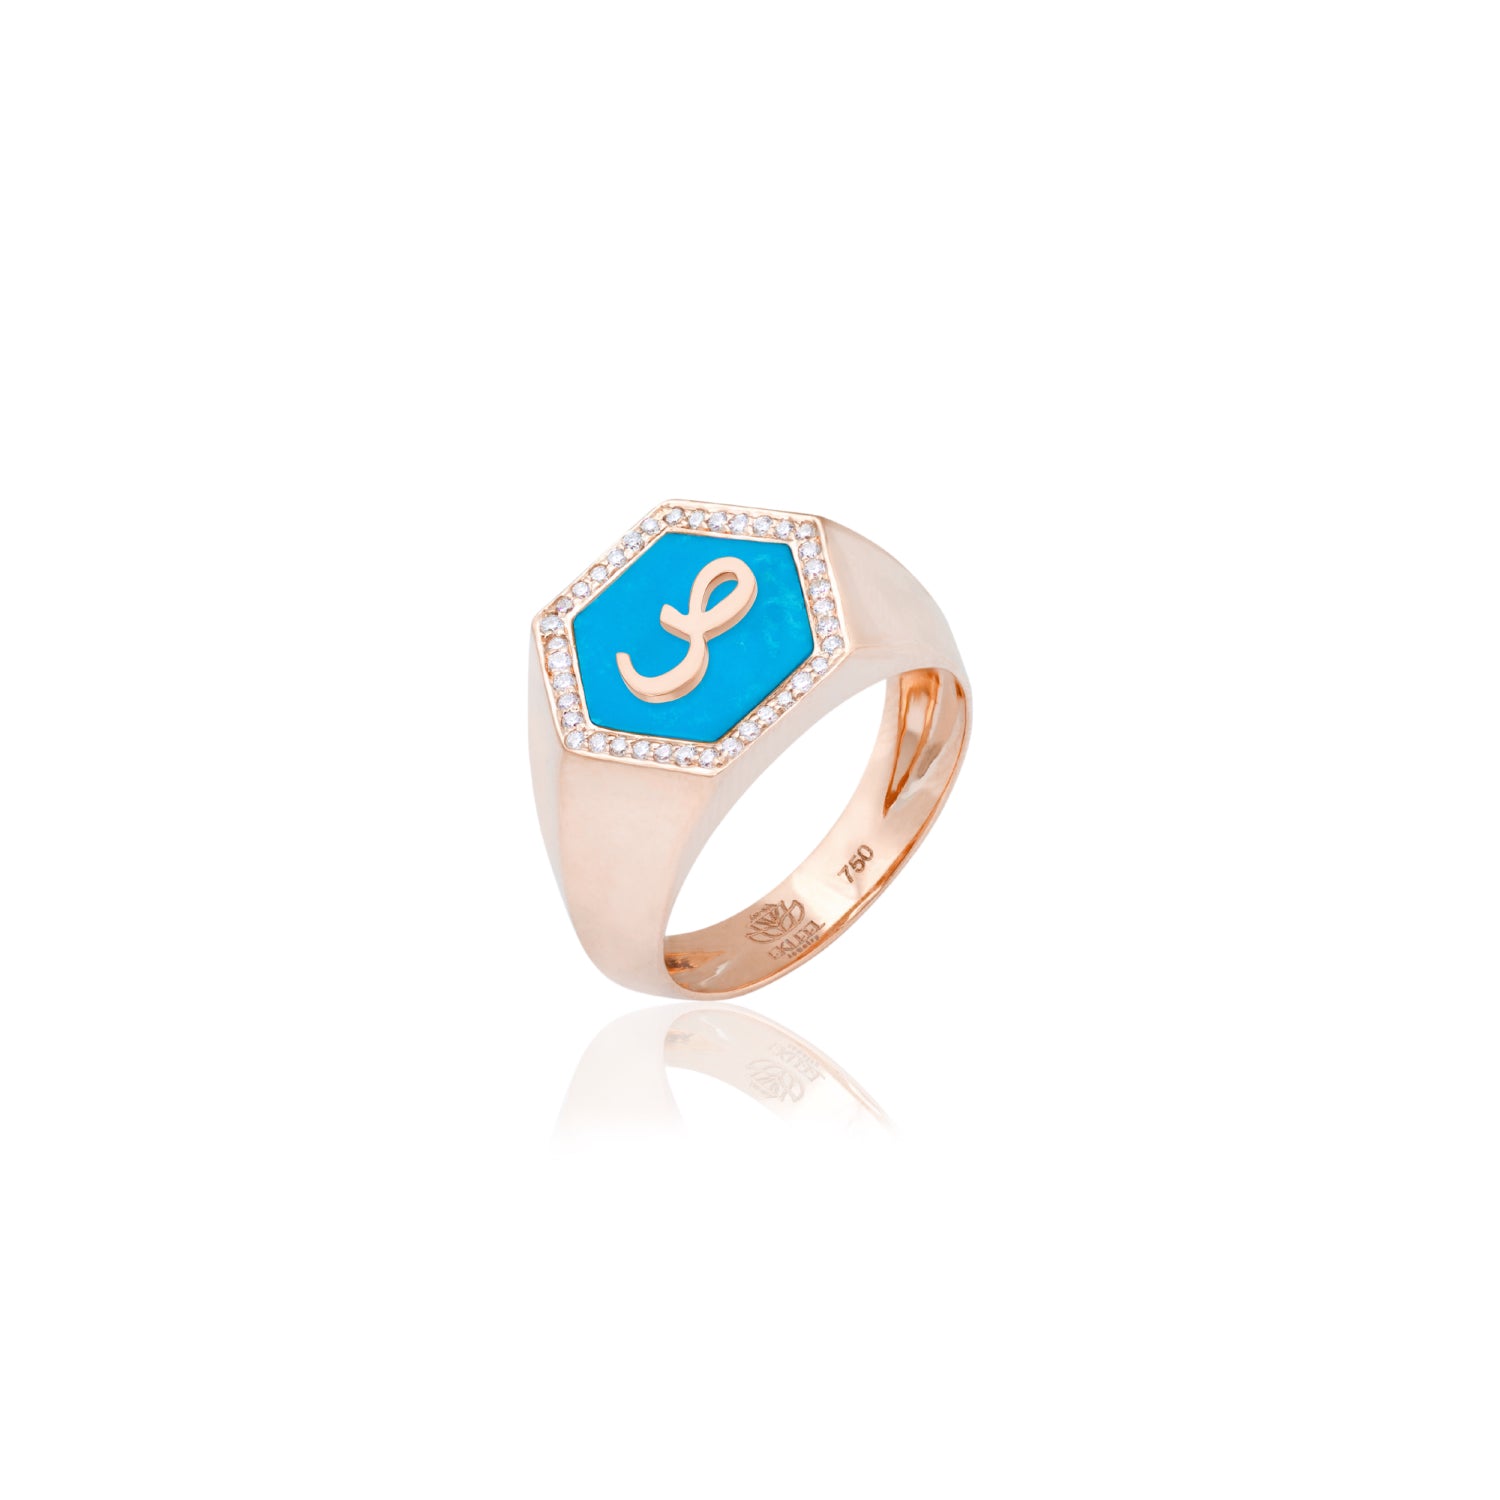 Qamoos 2.0 Letter ص Turquoise and Diamond Signet Ring in Rose Gold